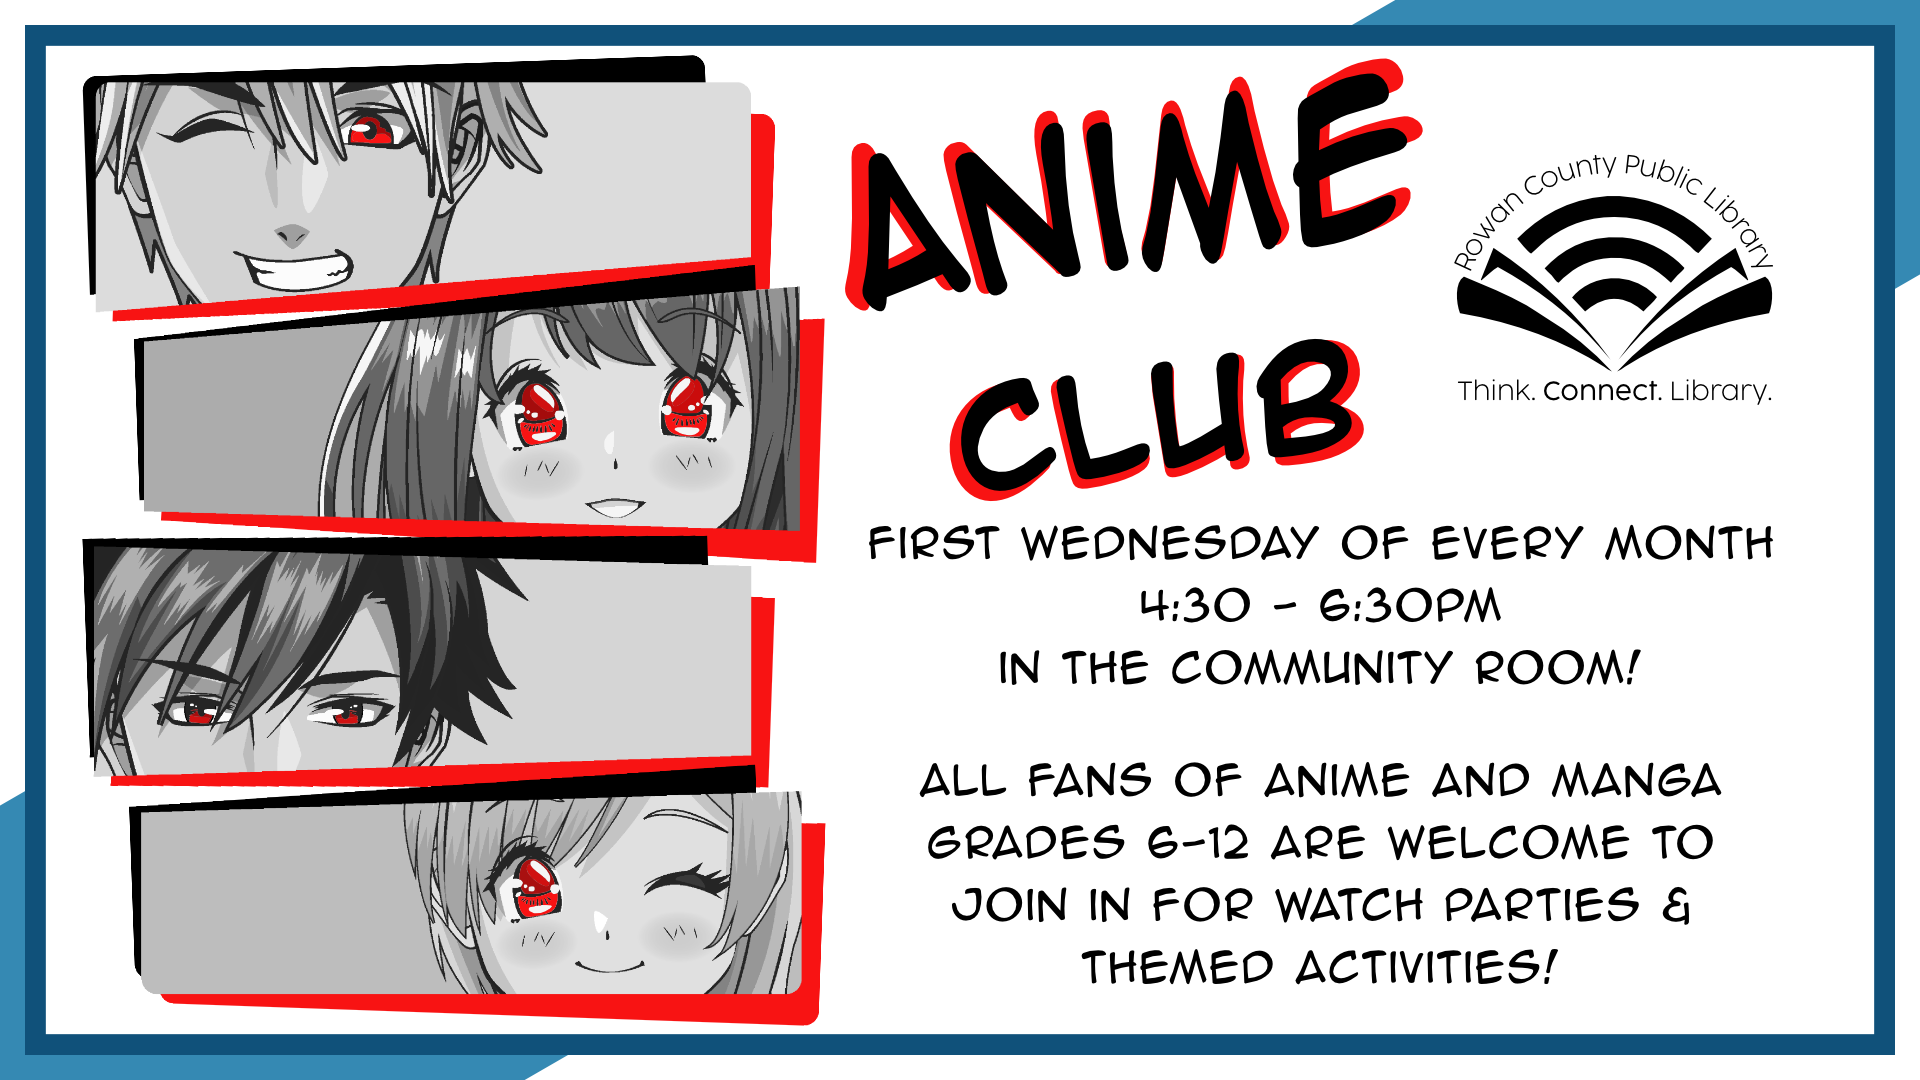 Remember ANIME CLUB IS TODAY! - HCPL Teen Blog